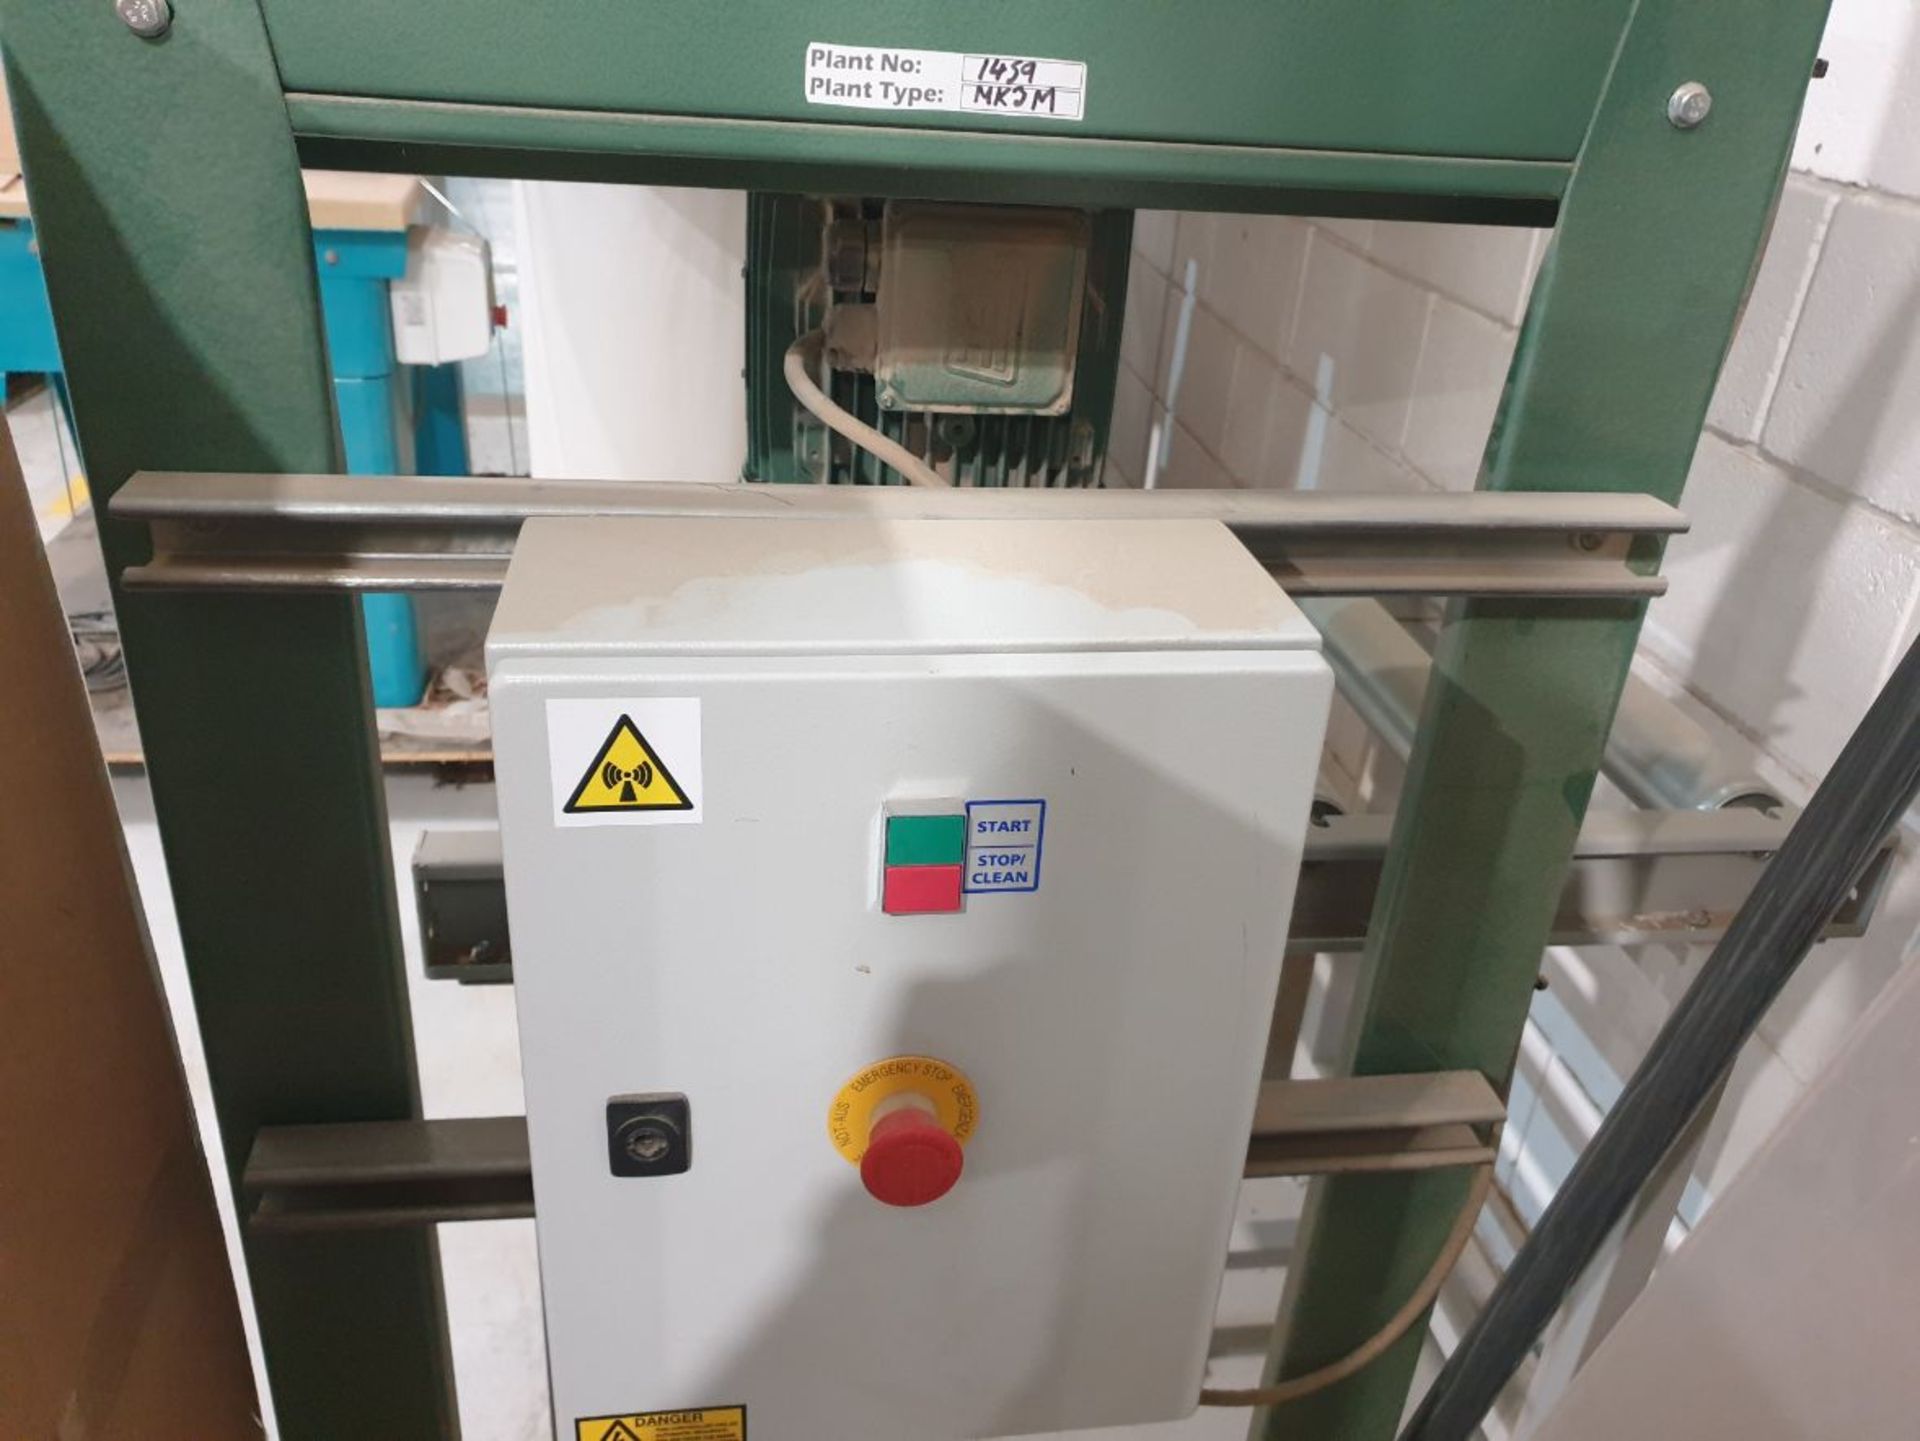 DCS MK3M 3 Bag Dust Extraction Filter Unit, Serial No. 1459, Year of Manufacture 2019, with Shaker & - Image 3 of 3